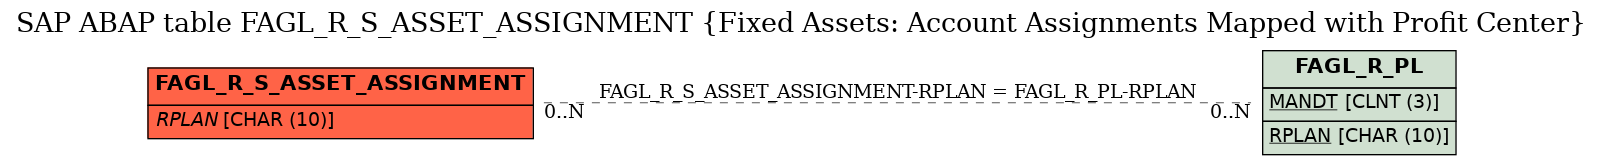 E-R Diagram for table FAGL_R_S_ASSET_ASSIGNMENT (Fixed Assets: Account Assignments Mapped with Profit Center)